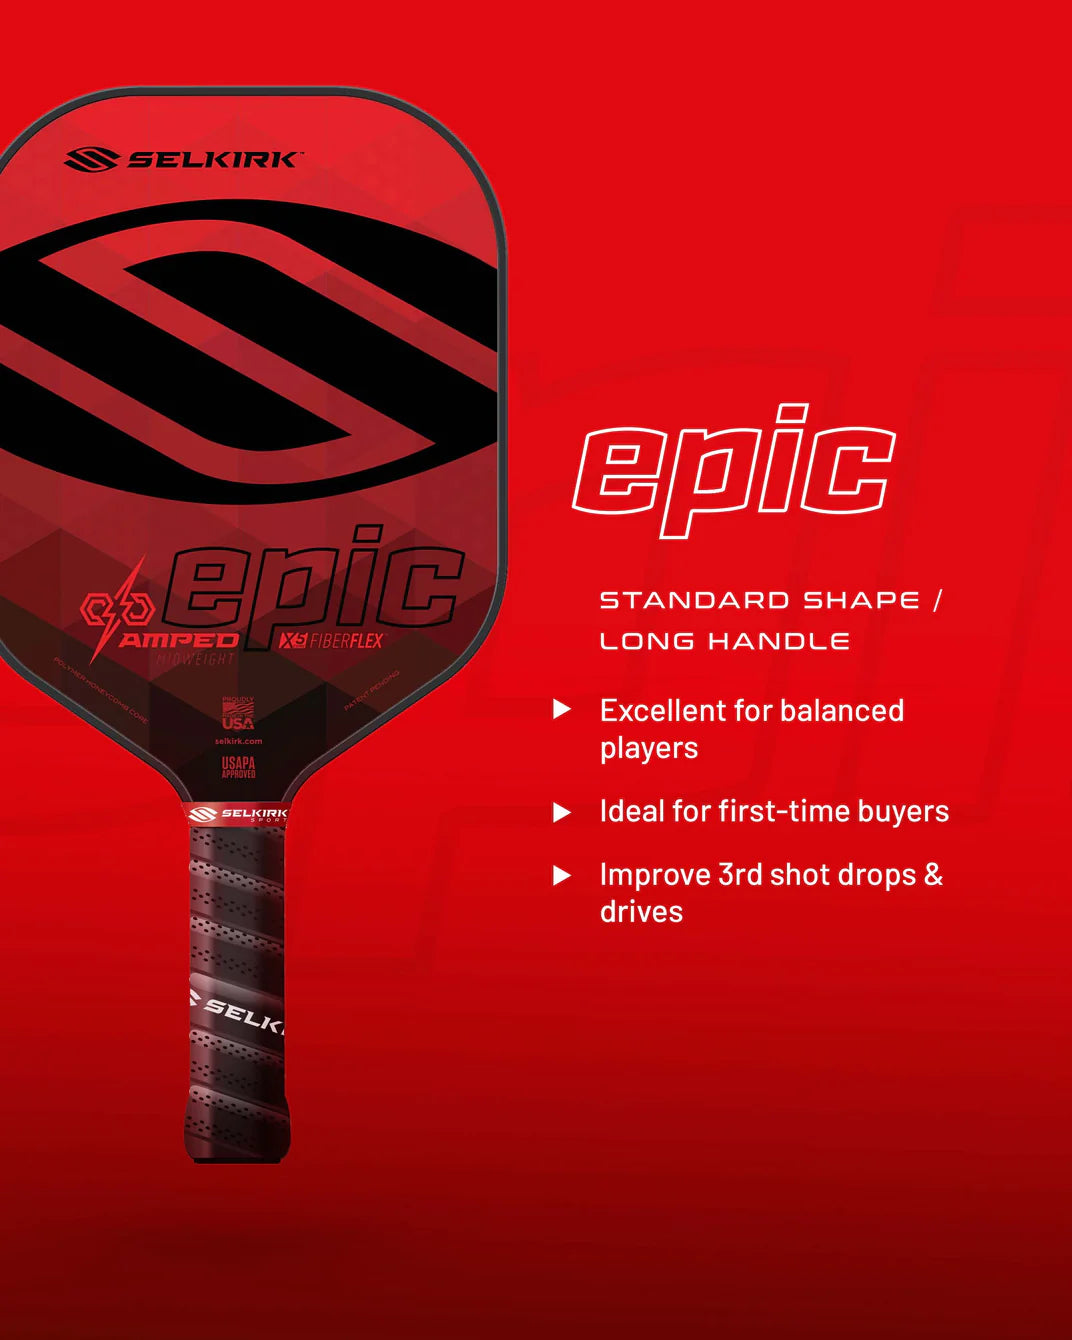 Selkirk Amped Epic Pickleball Paddle on sale at Badminton Warehouse